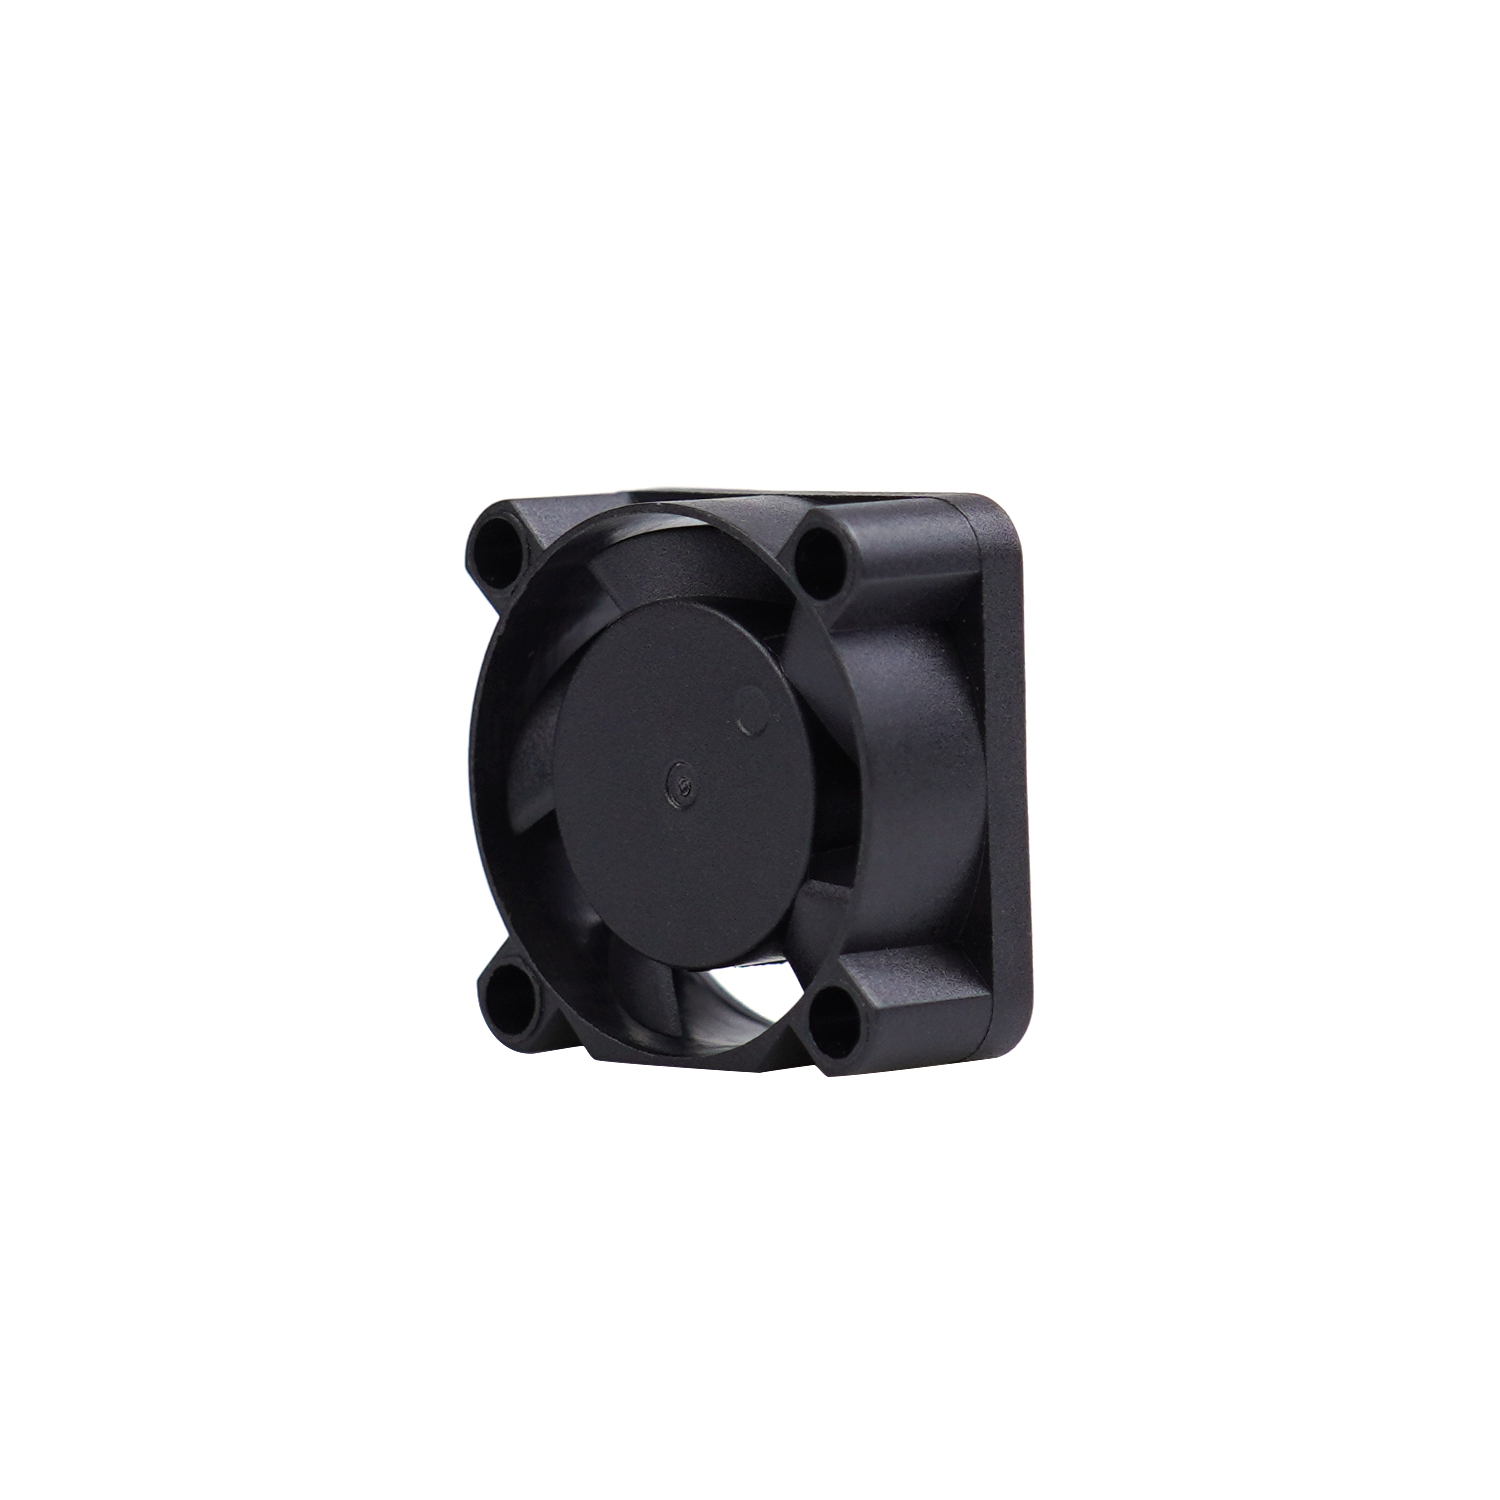 cooling 3.3v DC Axial Fan for server